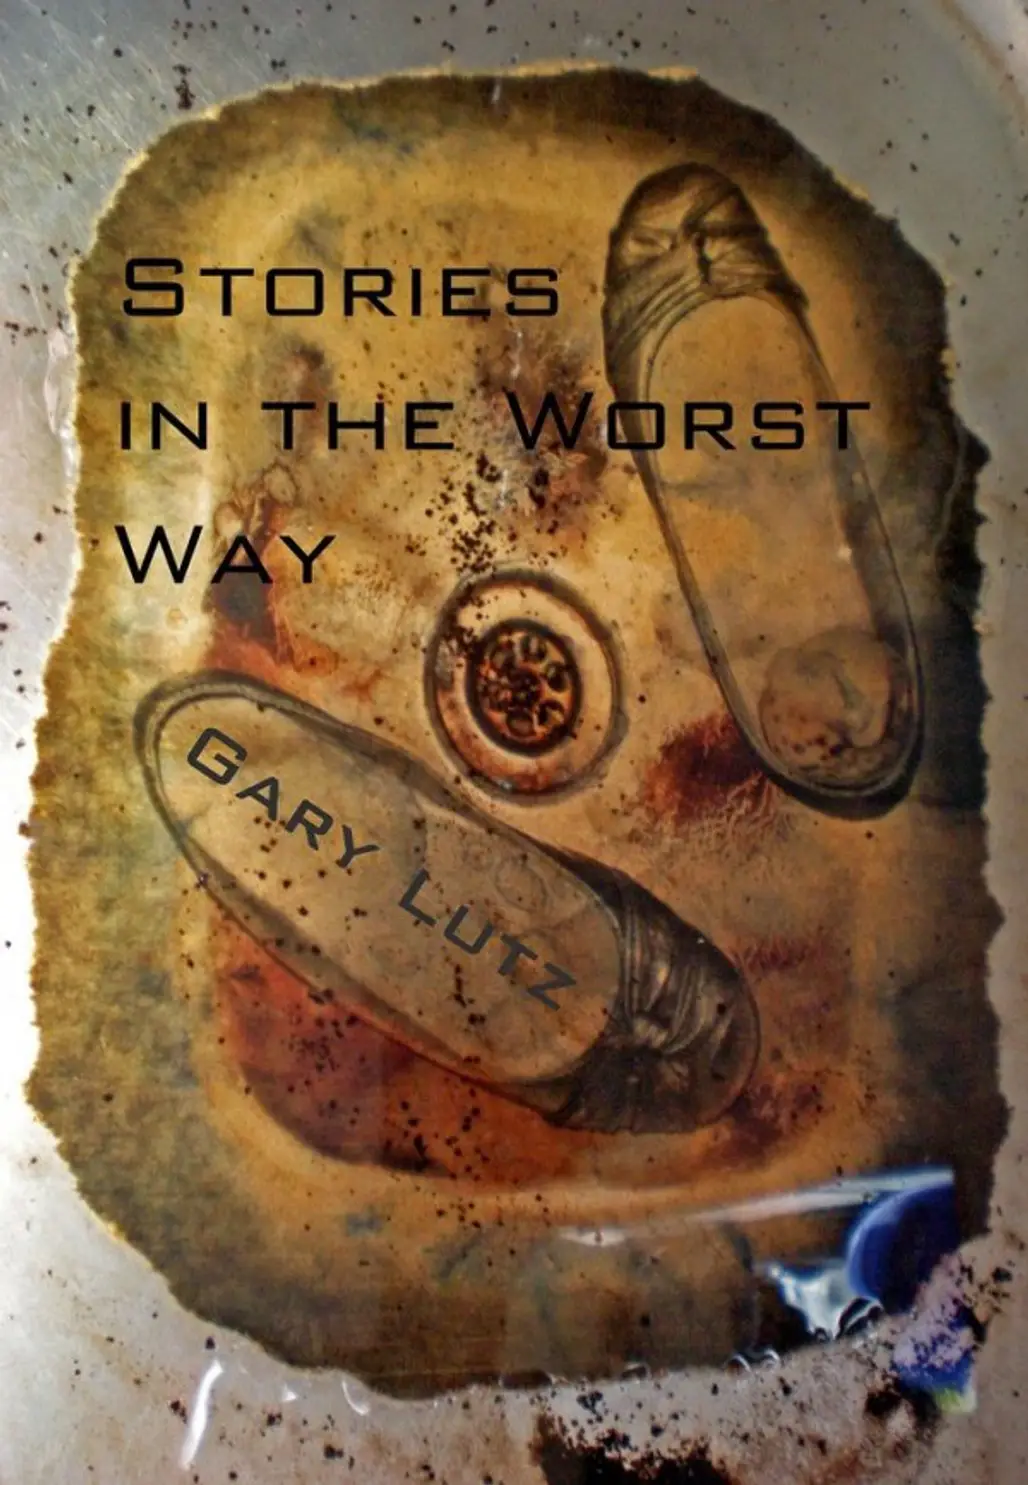 Stories in the Worst Way by Gary Lutz